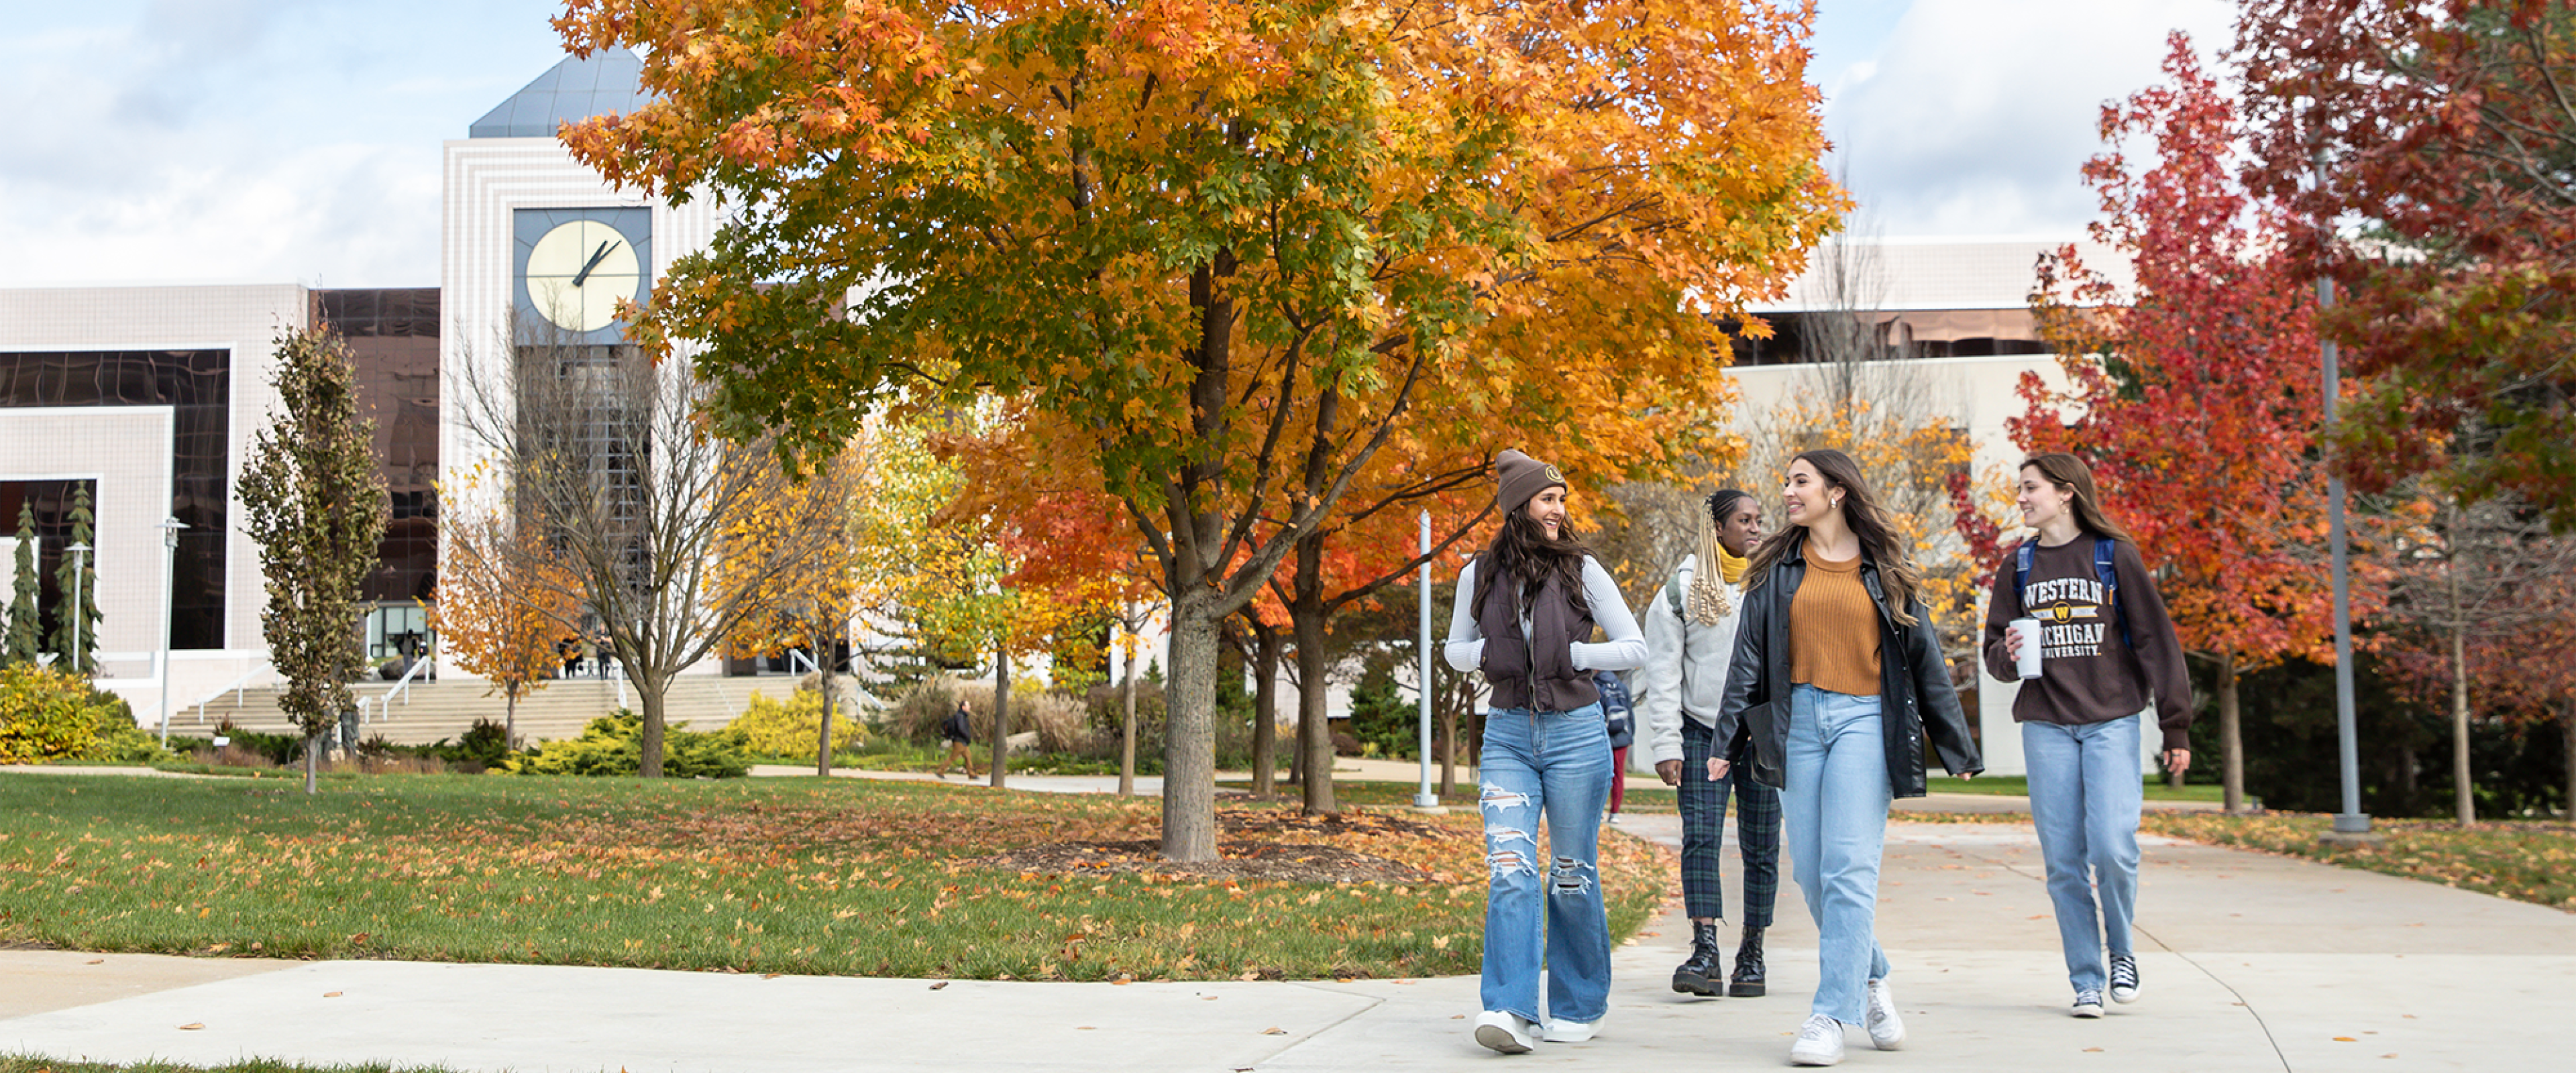 Group of WMU students walking on campus sidewalks in front of popular building and fall colored trees.